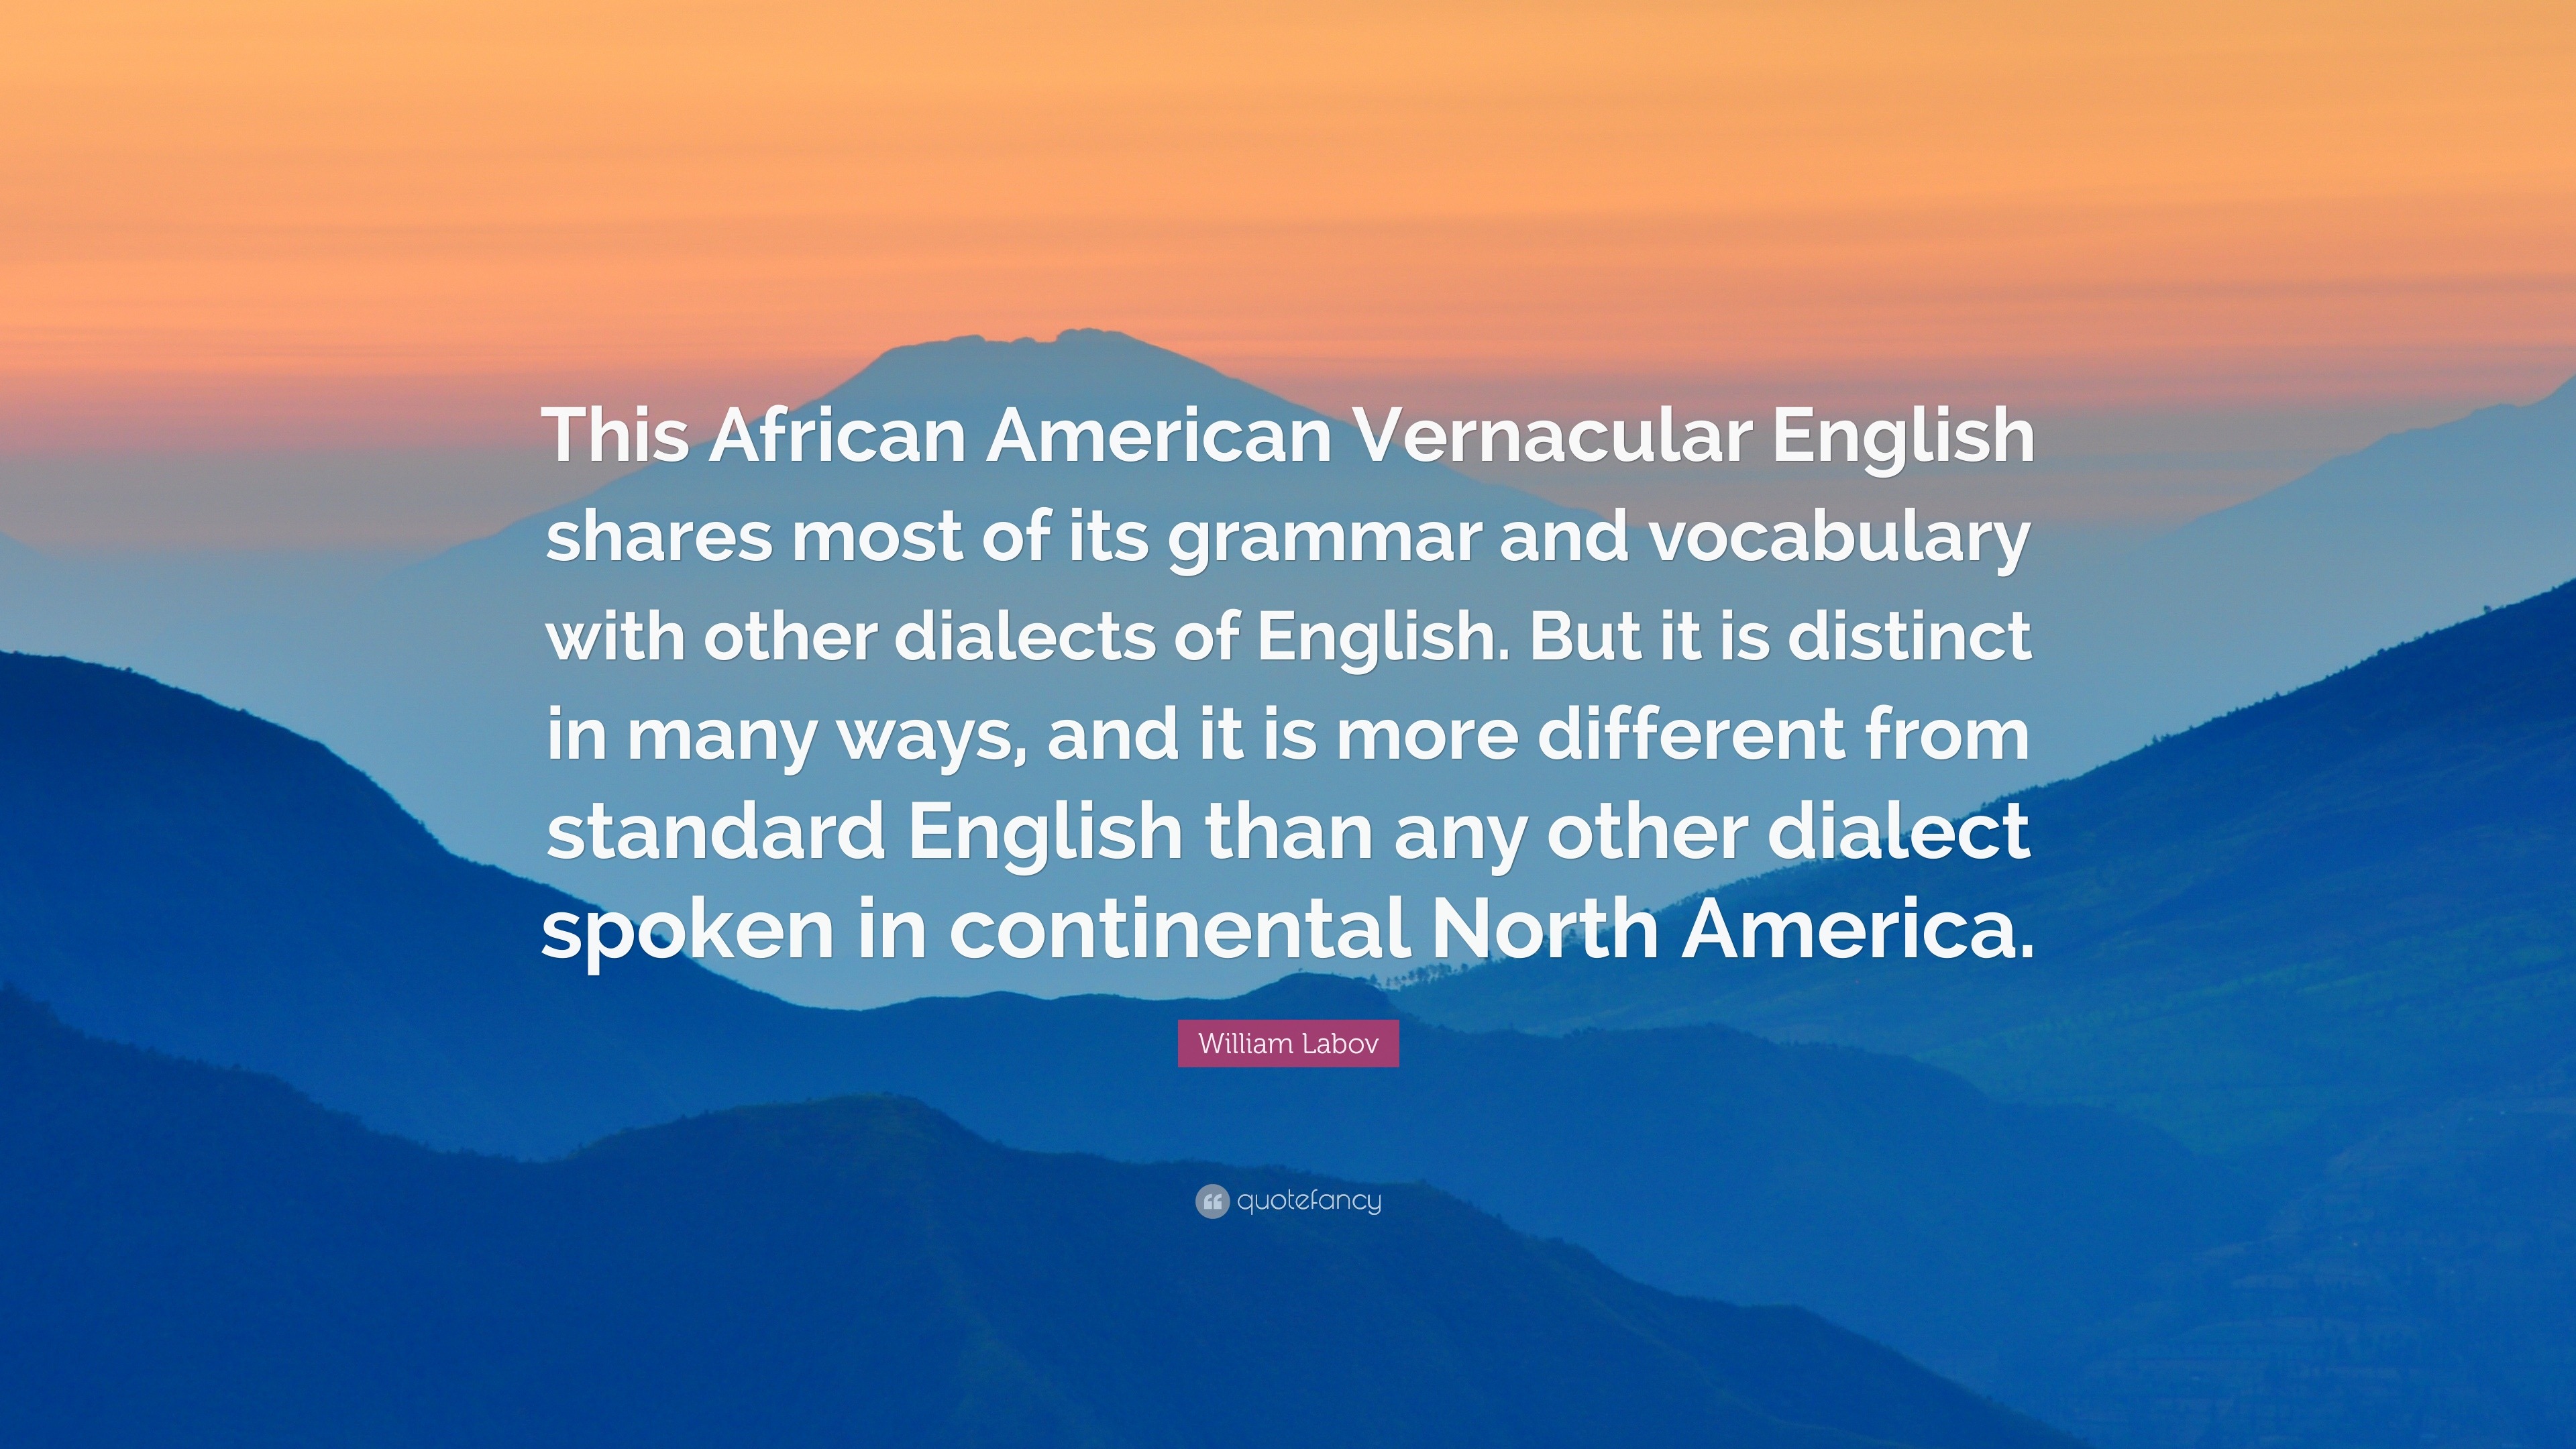 william-labov-quote-this-african-american-vernacular-english-shares-most-of-its-grammar-and